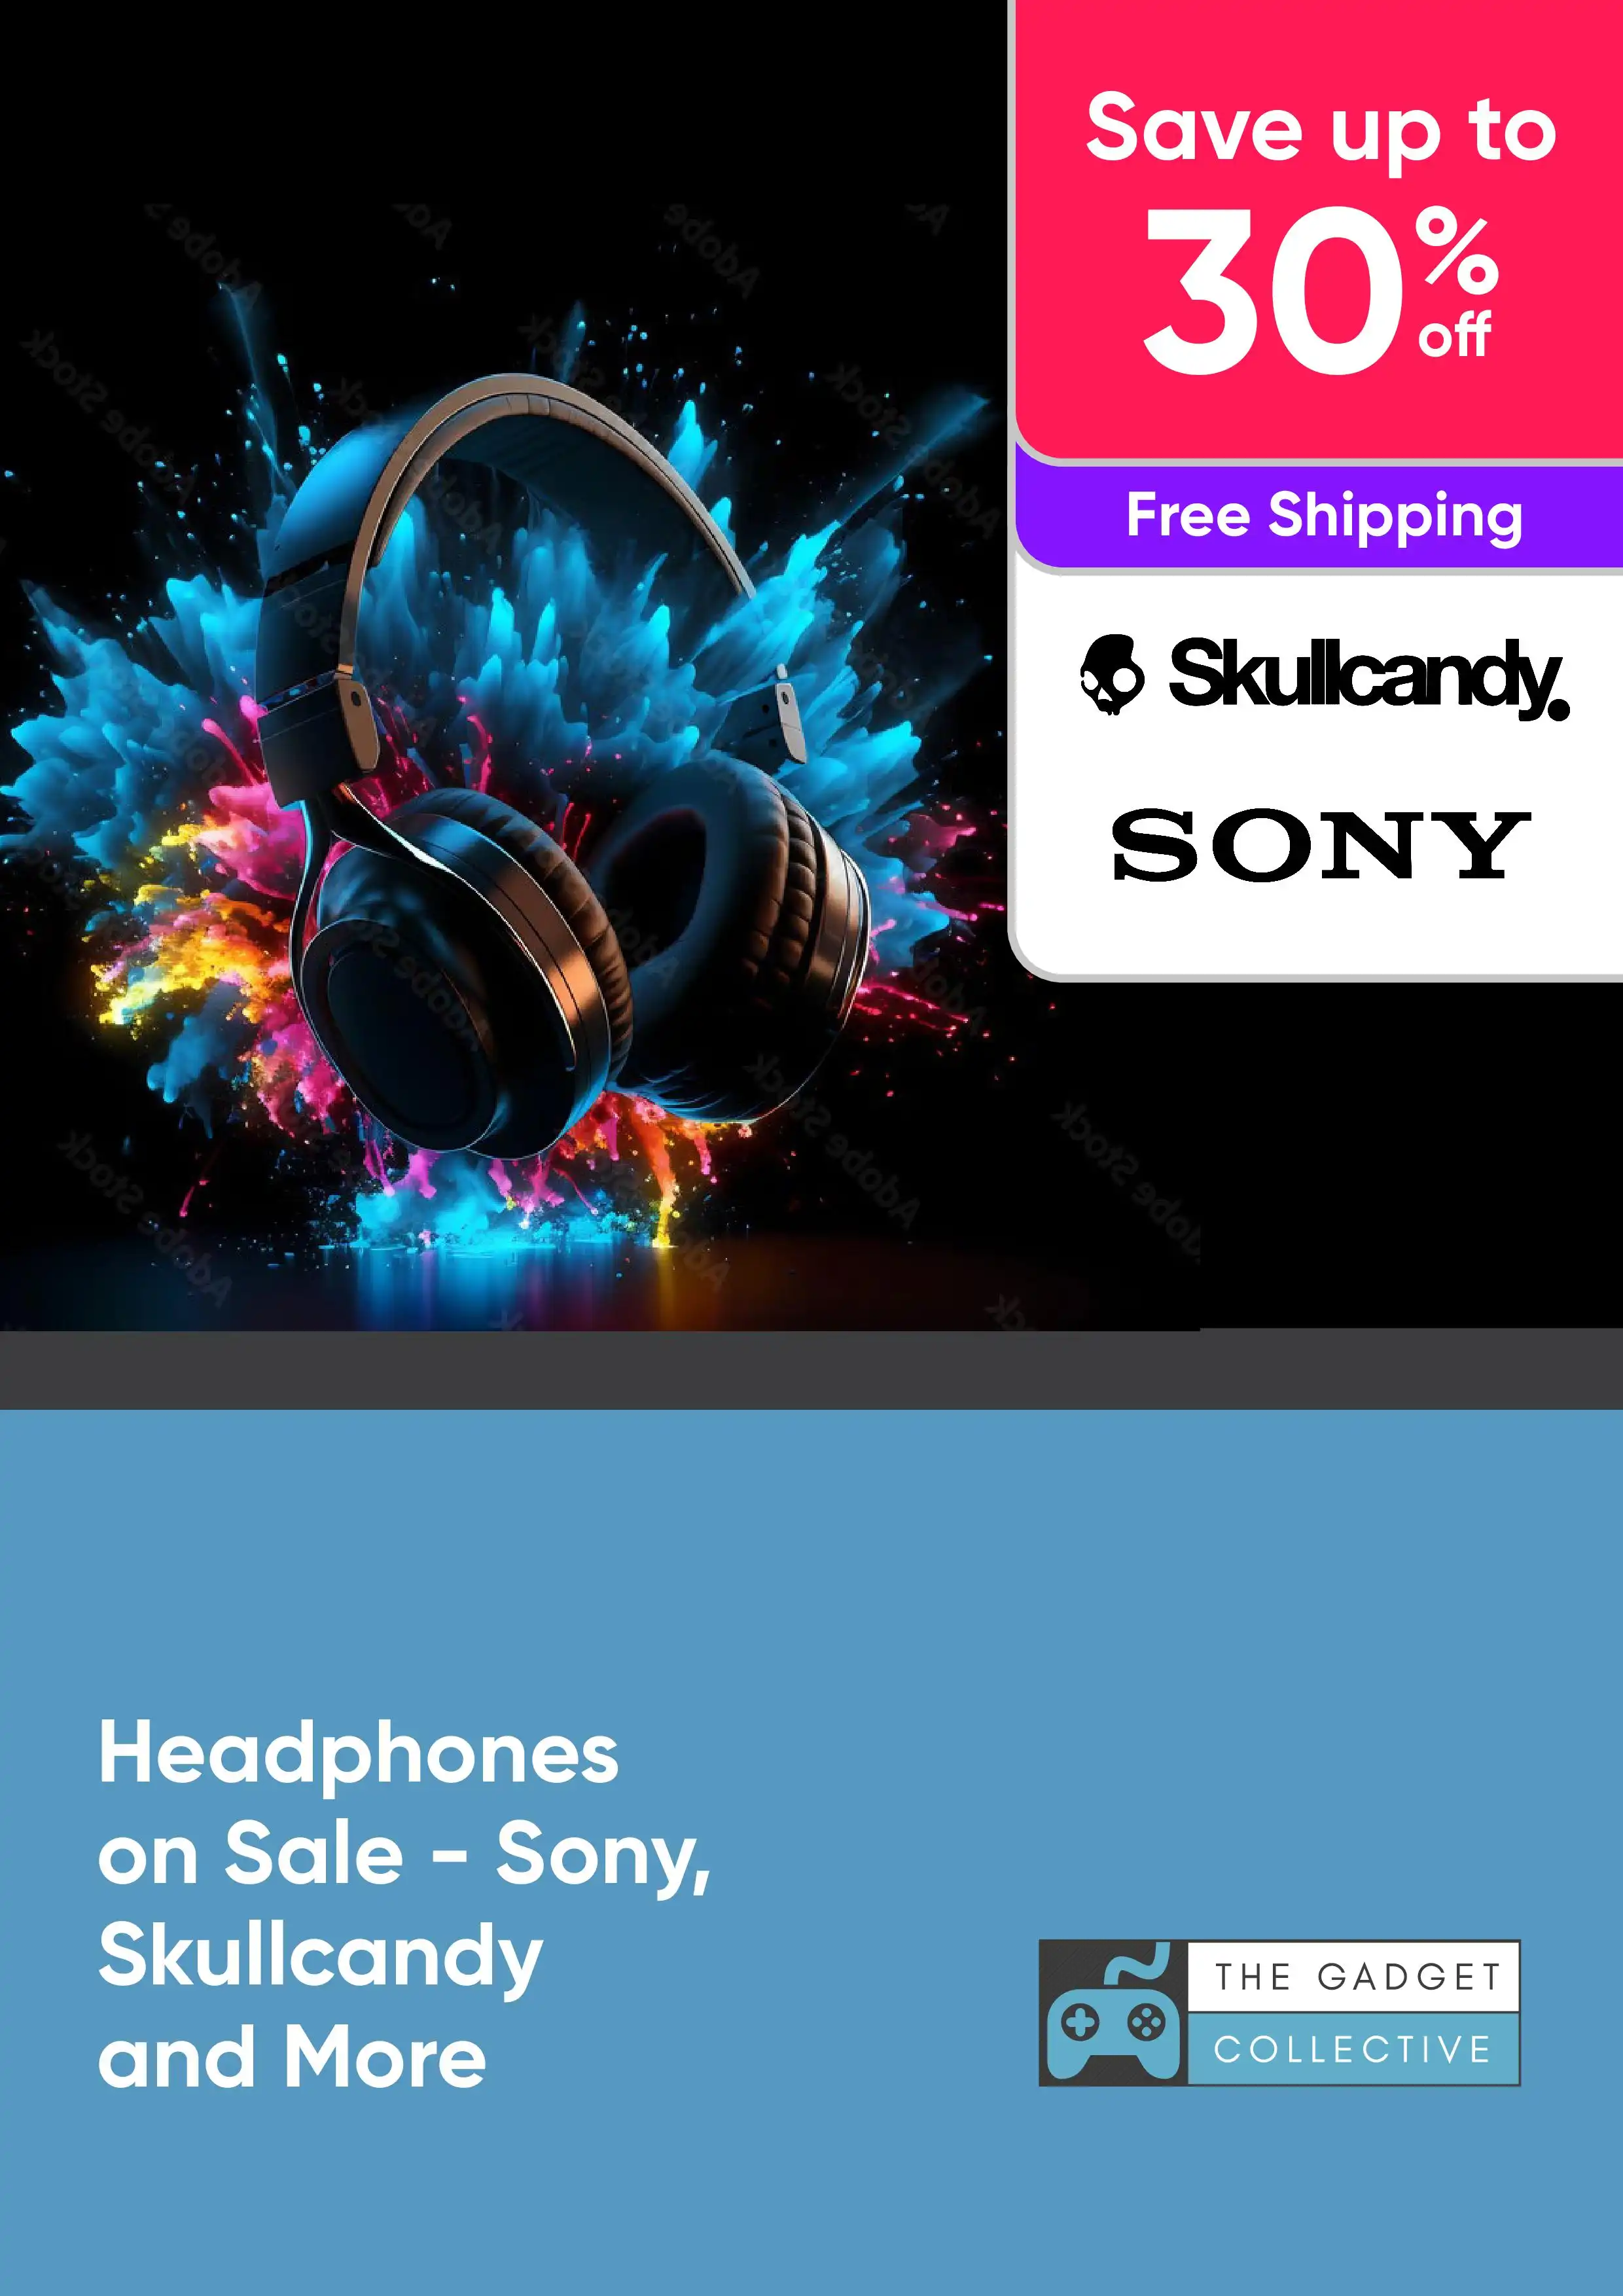 Shop Headphones Up to 30% Off - Save on Sony, Skullcandy & More